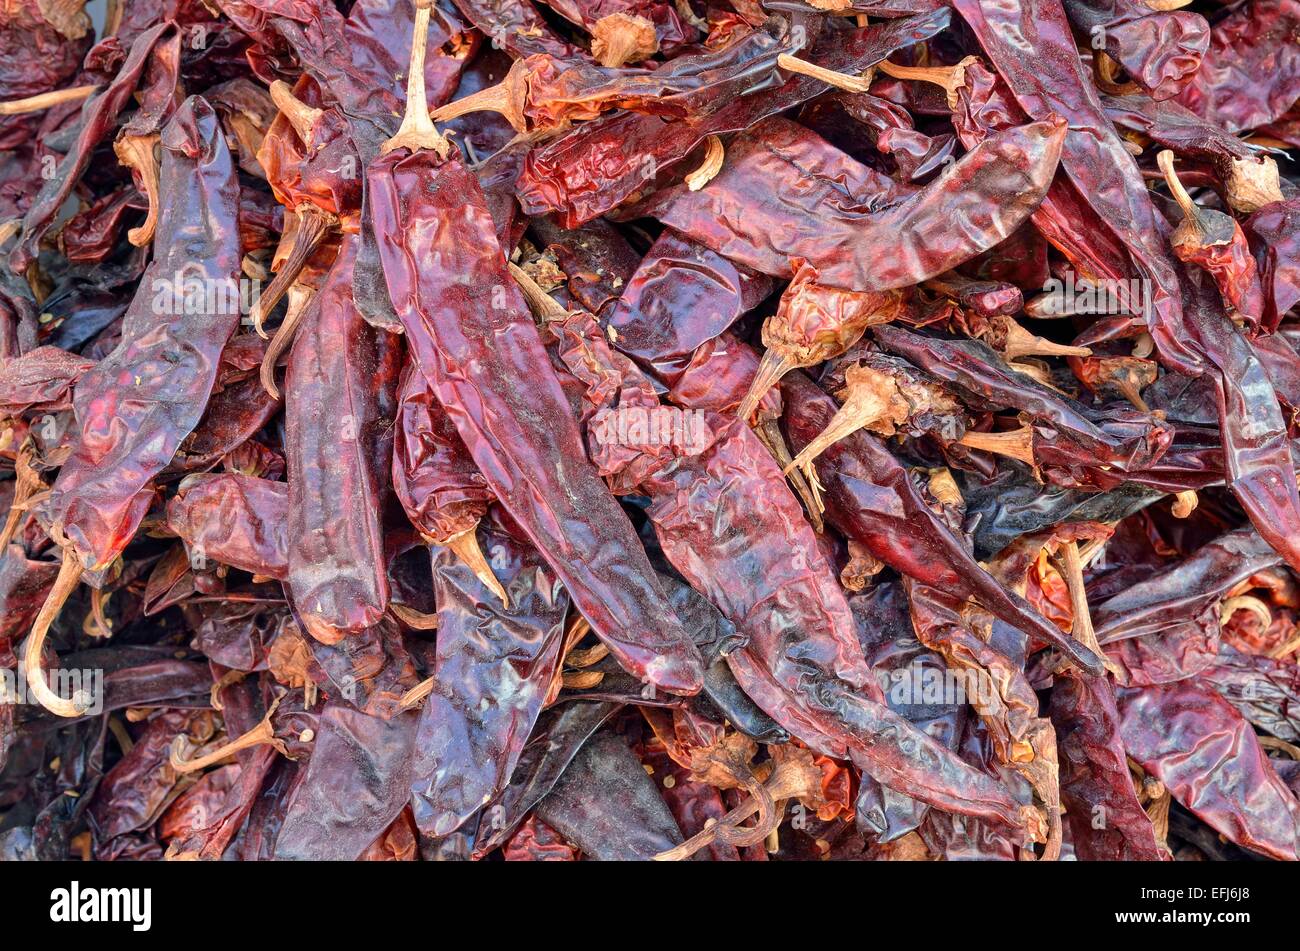 Dried chili peppers (Capsicum sp.), Mexico Stock Photo